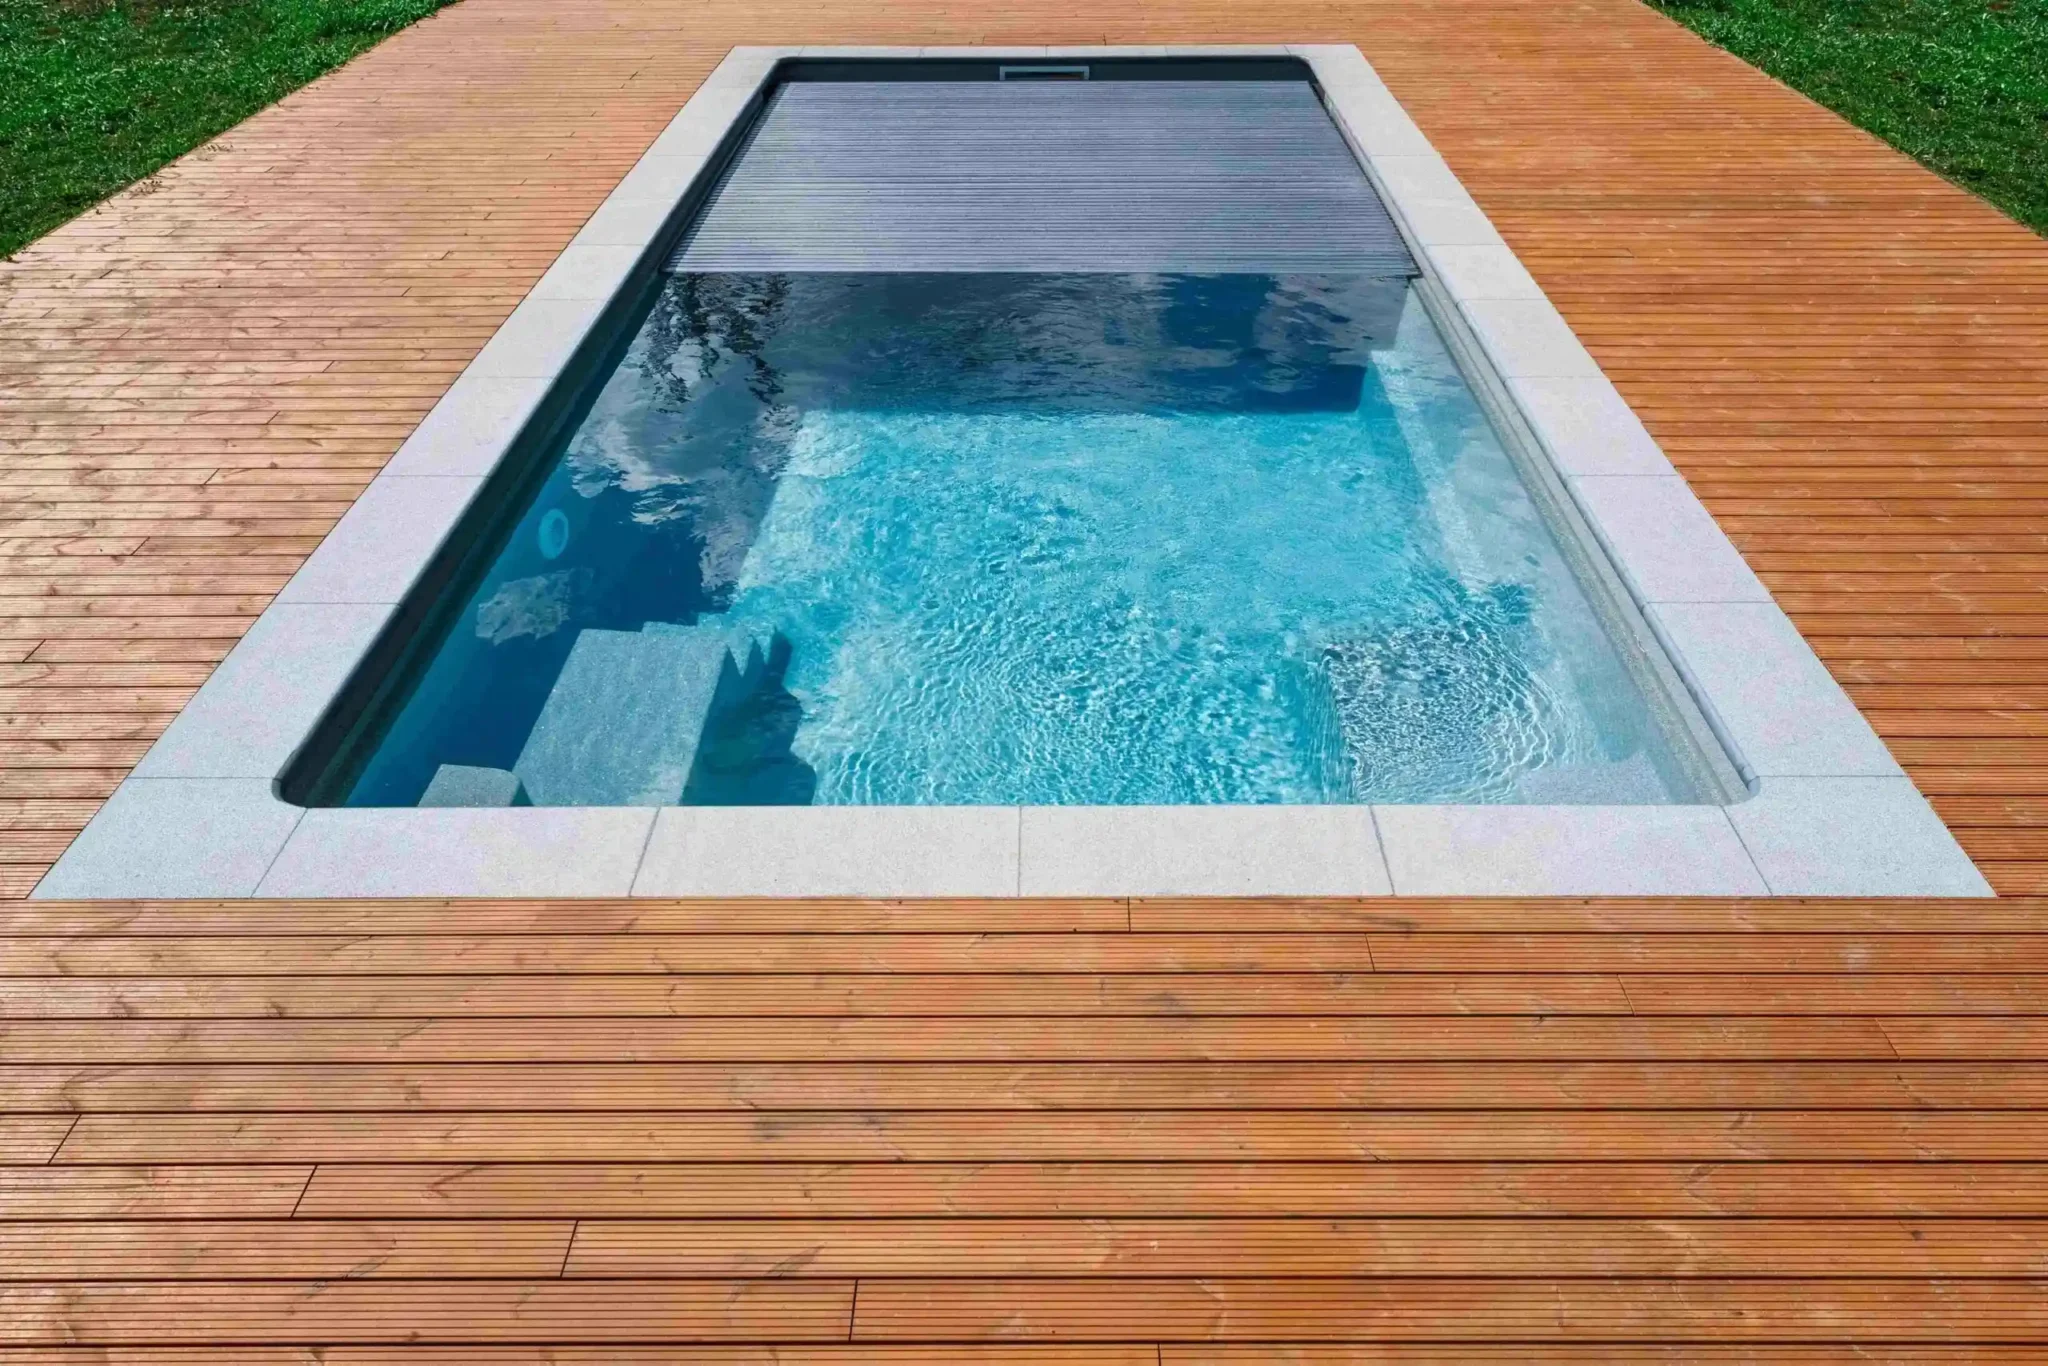 How Electric Pool Covers Revolutionize Pool Maintenance - Solar Pool Covers: The Secret to a Warmer, Cleaner Pool